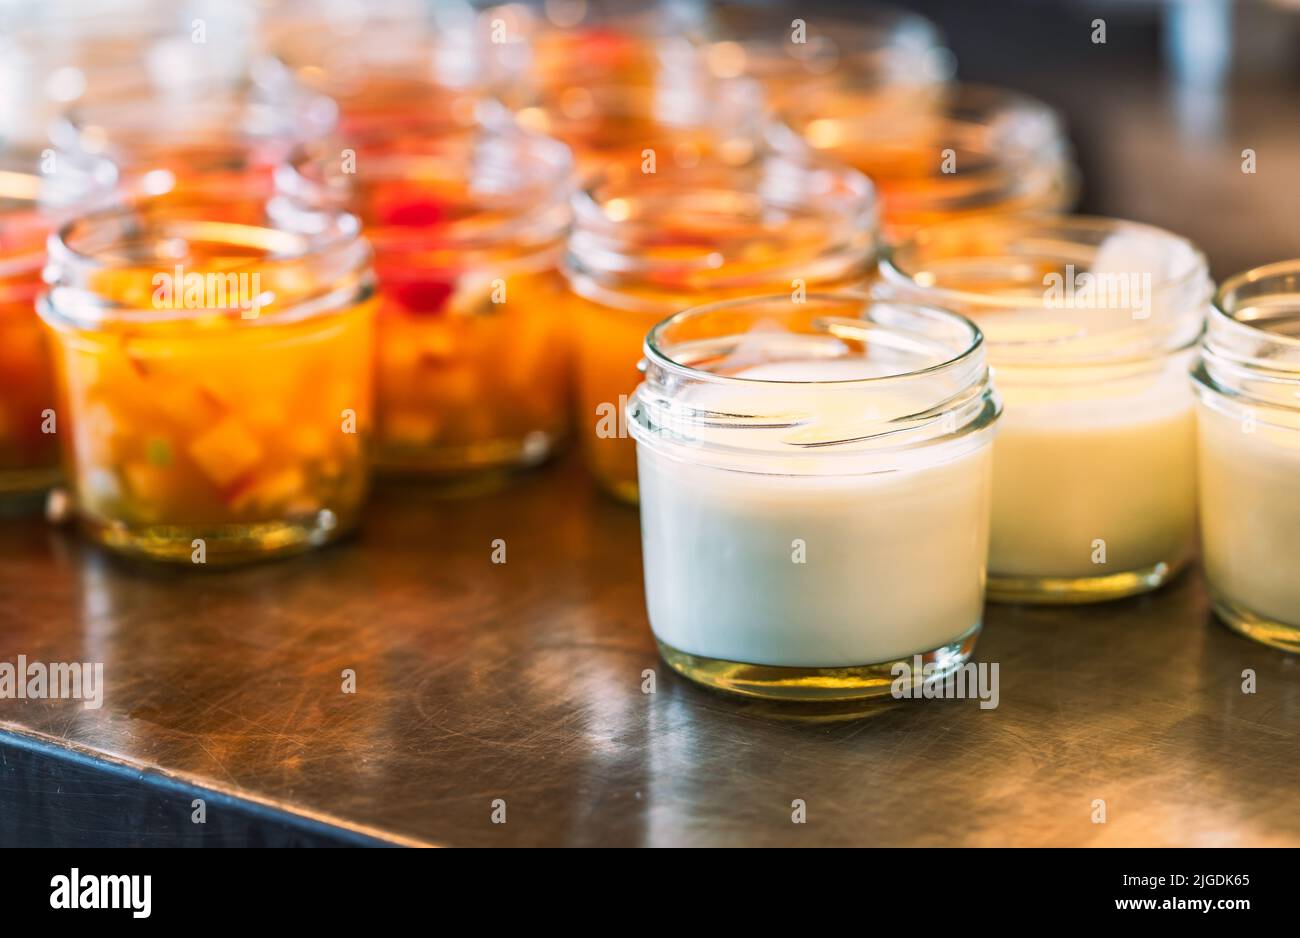 Homemade plain yogurt in small bottle glass on stainless steel shelf with blurred background of fruit salad in small bottle glass, close up image with Stock Photo